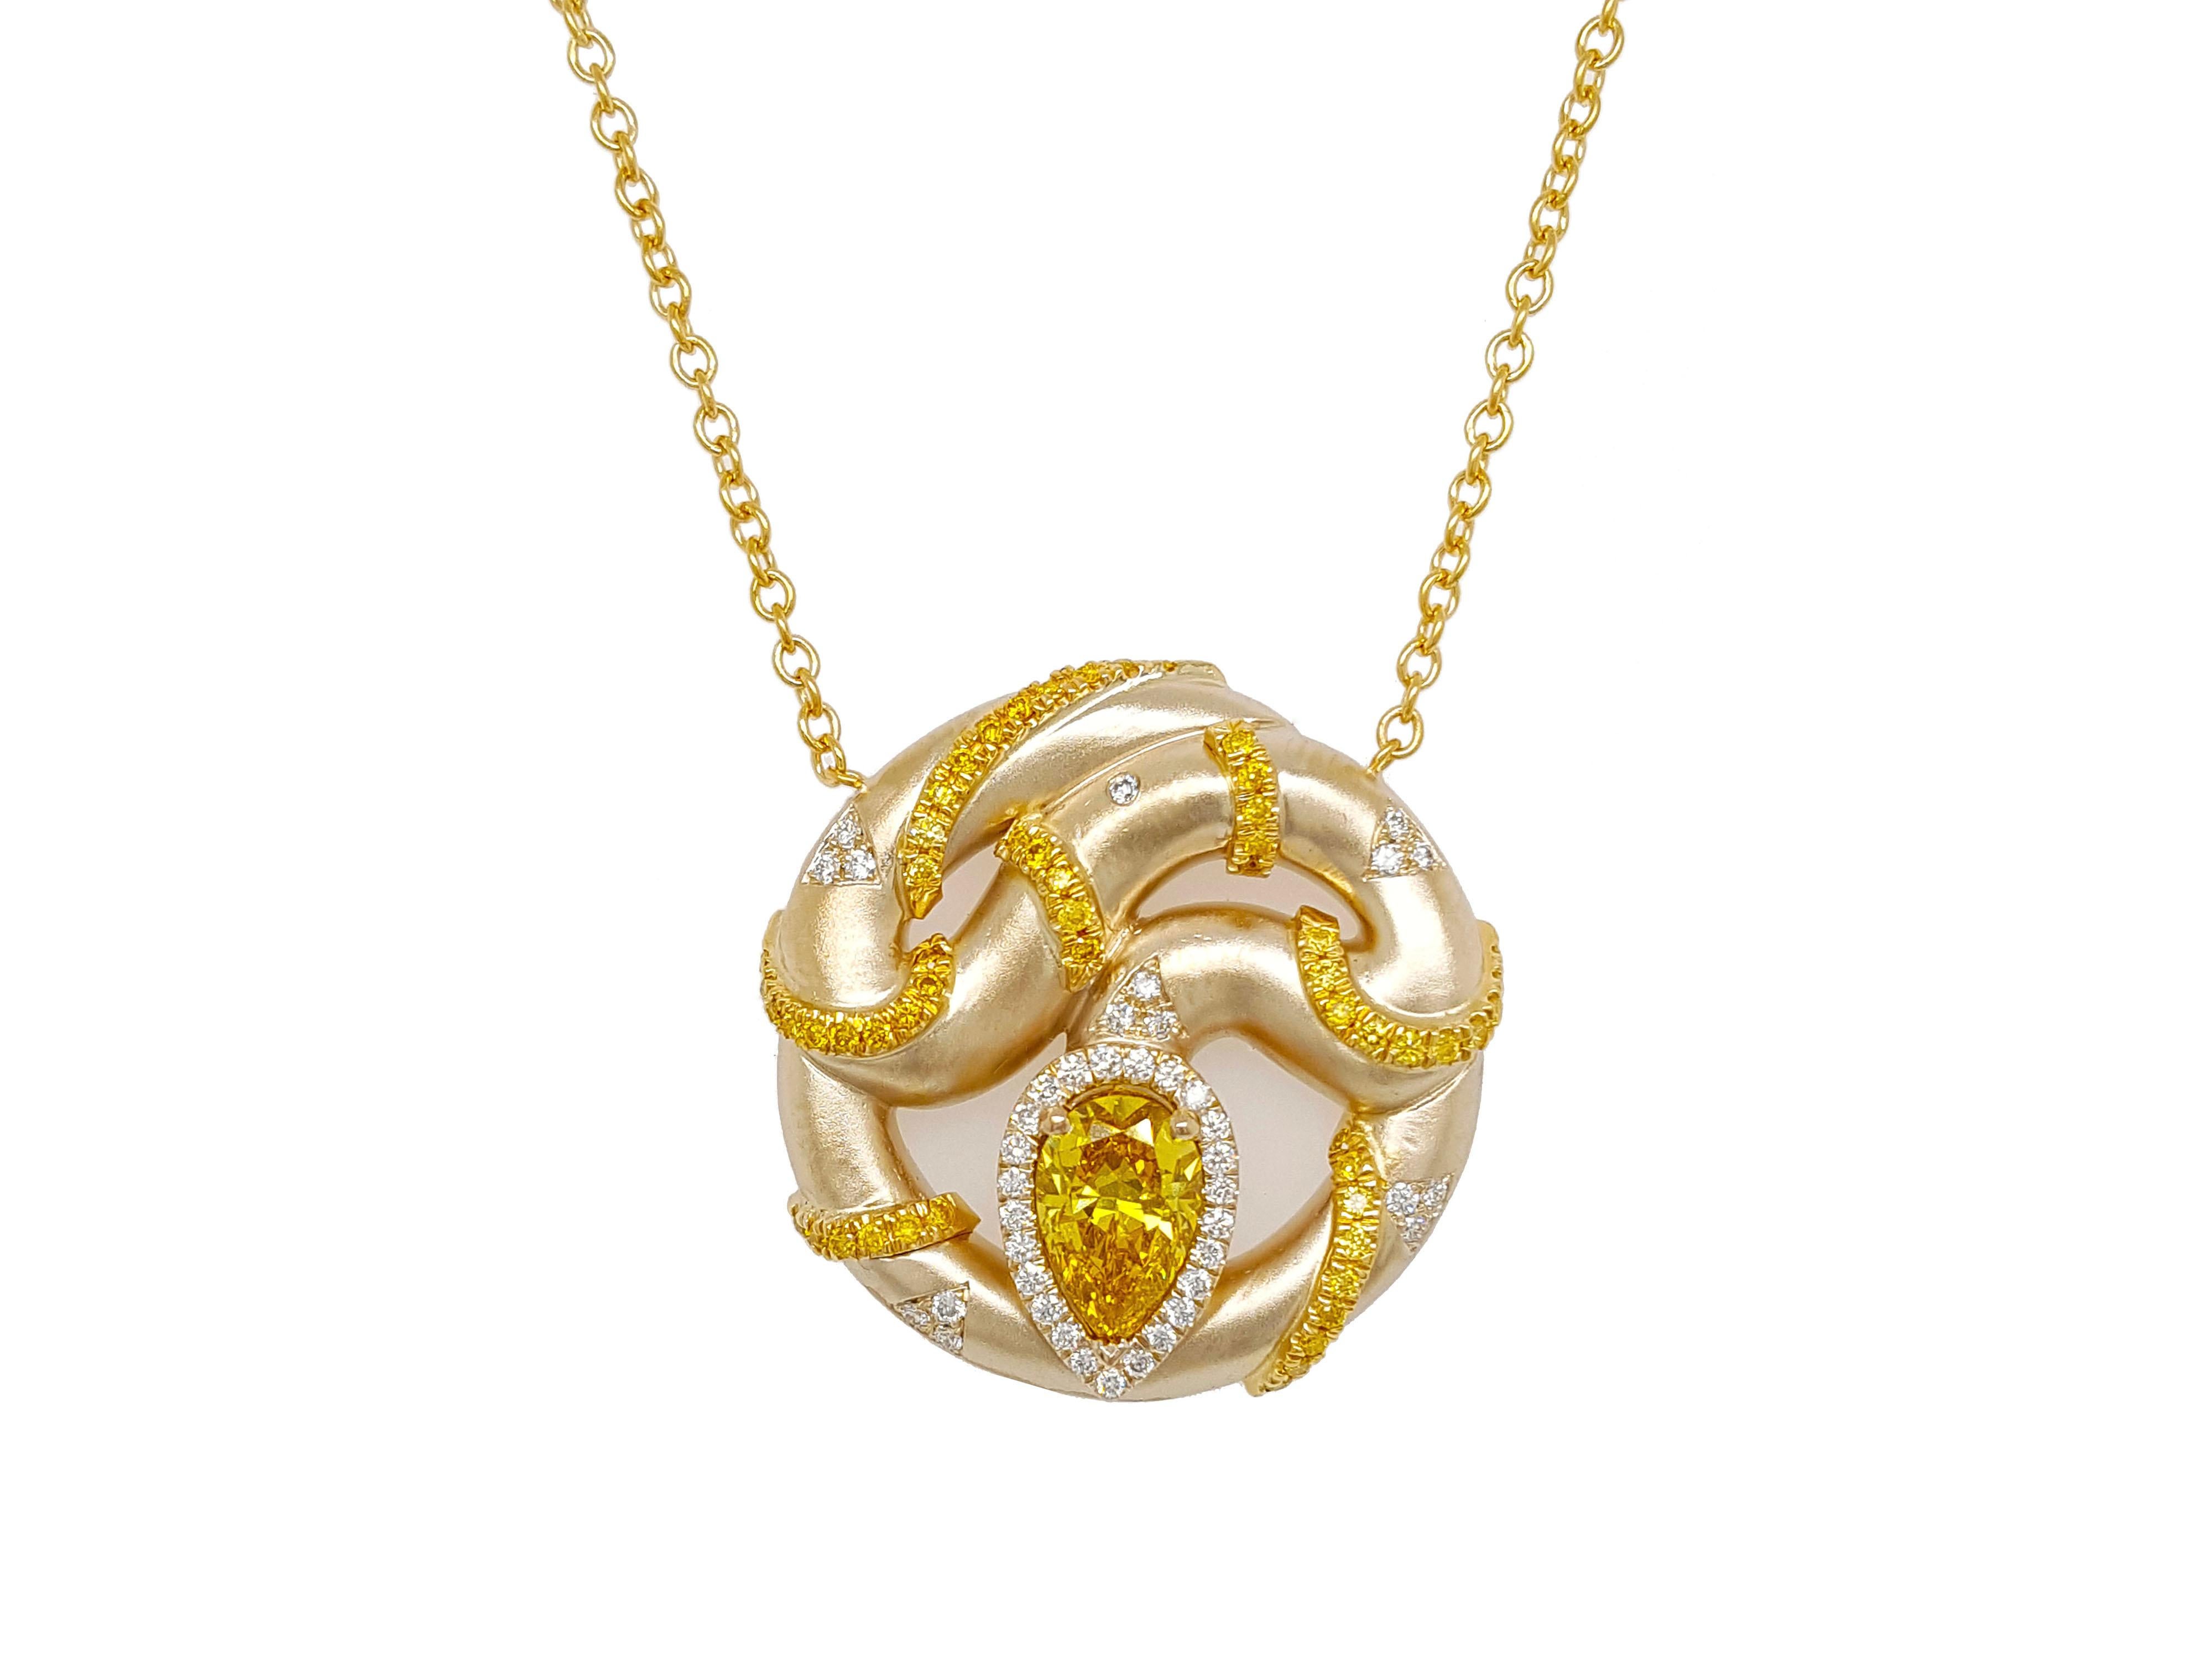 Featuring a unique Snake Pendant Necklace 18K Yellow gold, 1.03 carat pear-shaped Fancy Vivid Yellow diamond pendant. certified by GIA as VS1 clarity. A miniature masterpiece painted in the finest round brilliant yellow and white diamonds, swirls of